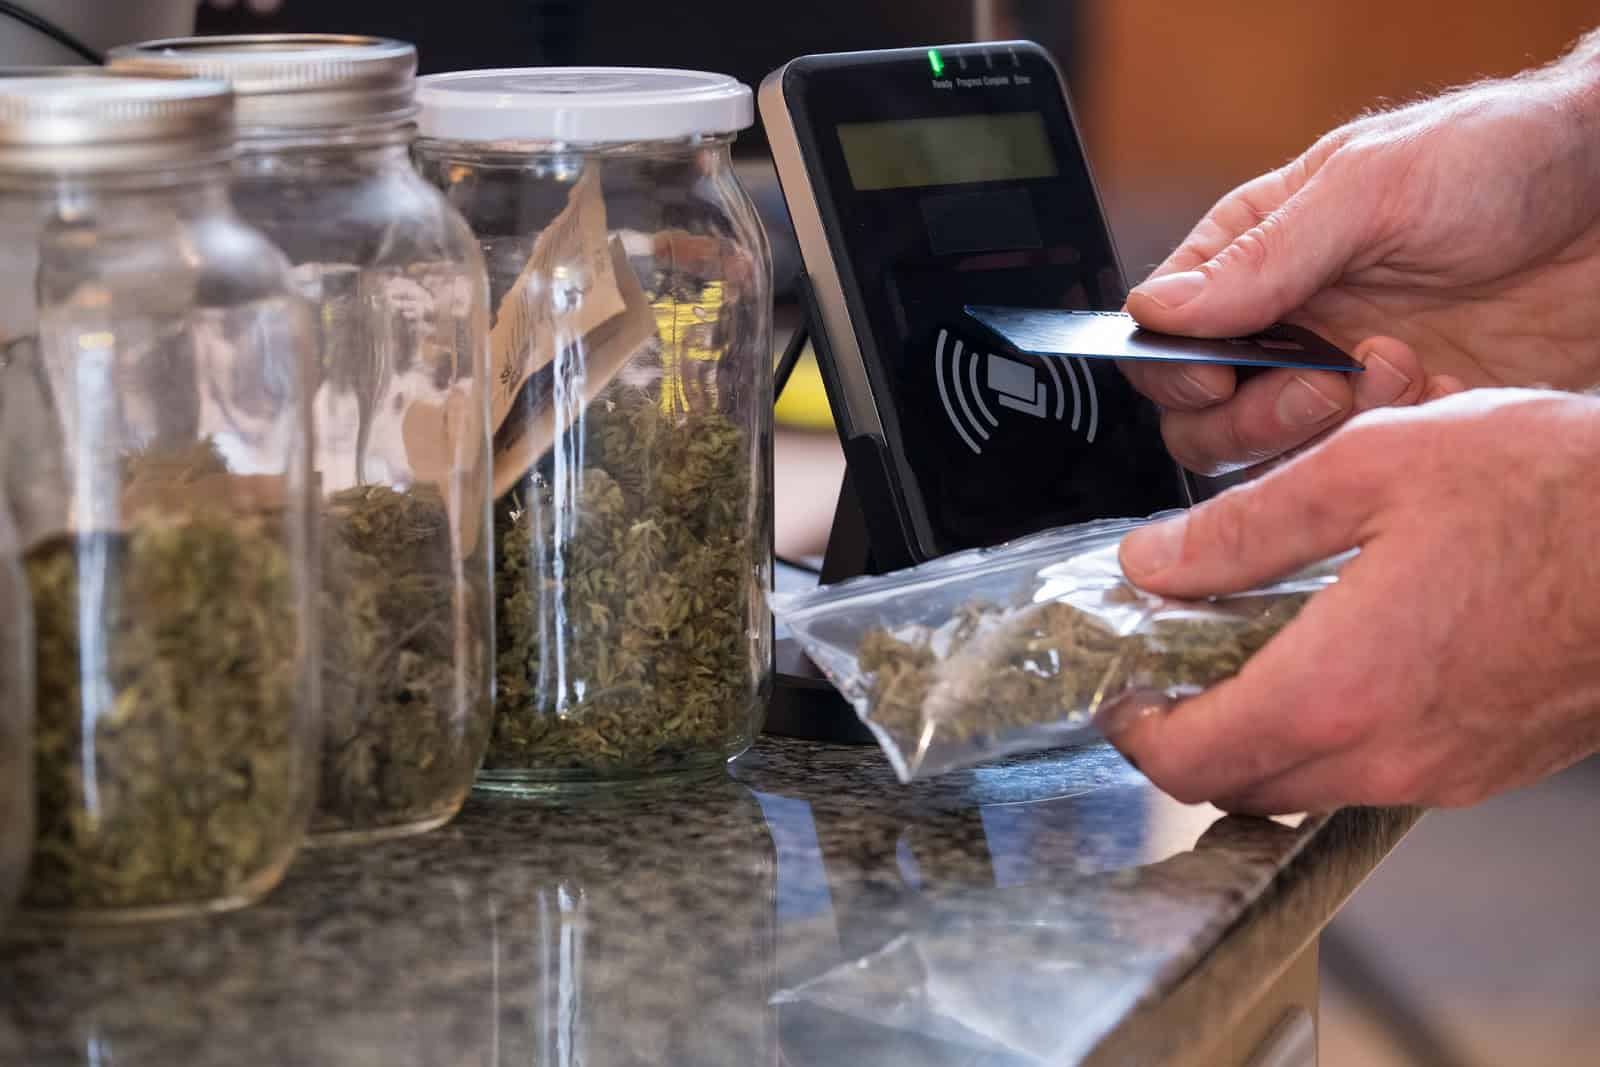 8 Reasons to Shop at a Licensed Weed Dispensary in California